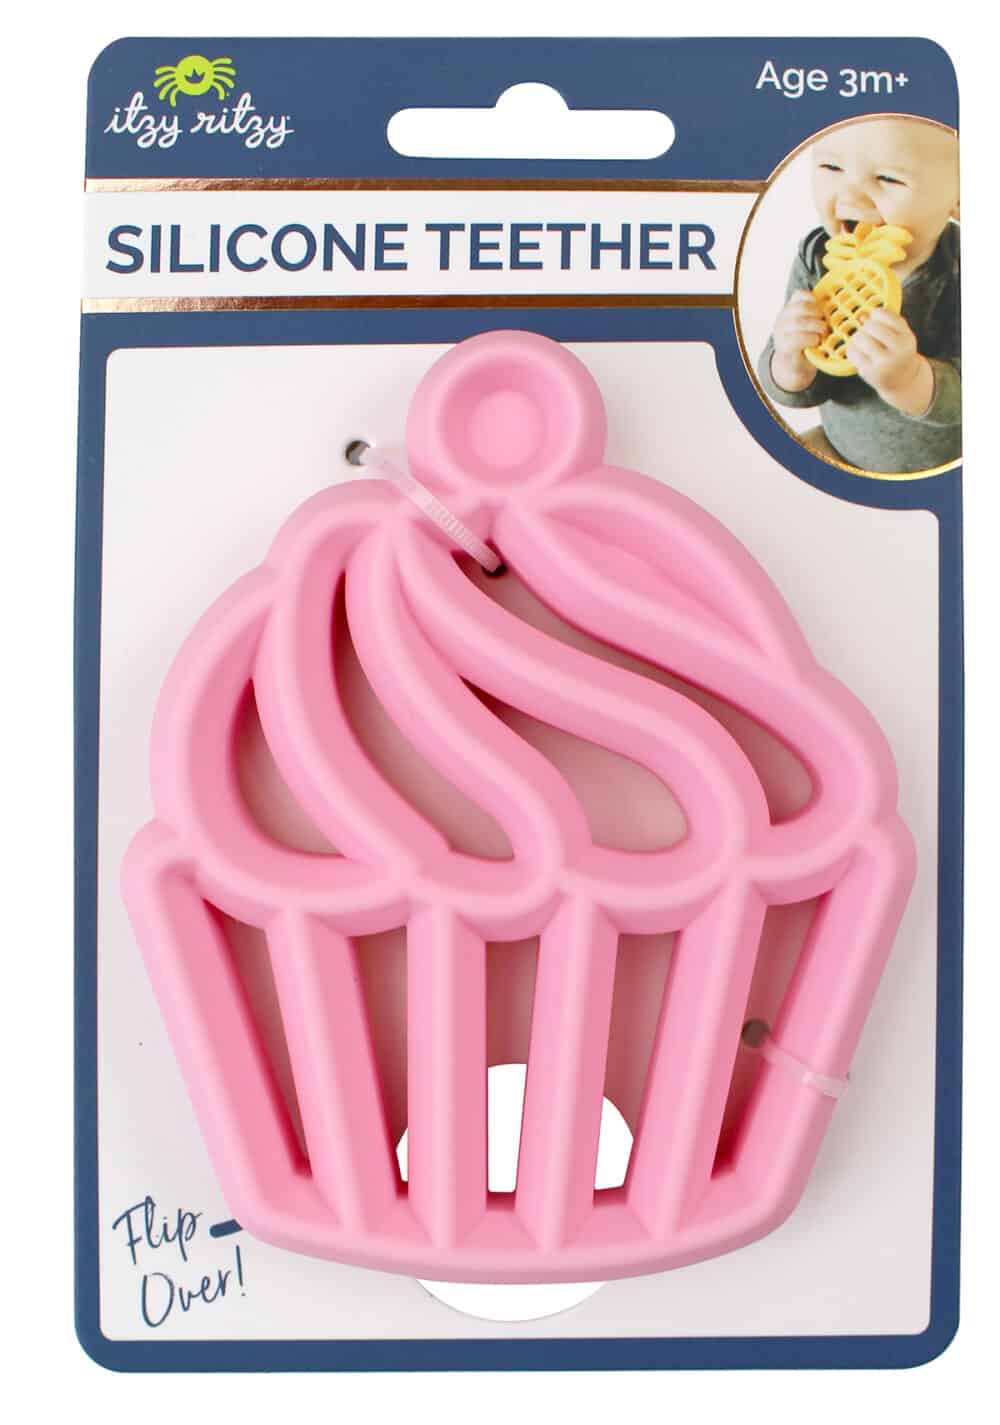 A pink silicone teether with a cupcake on it.